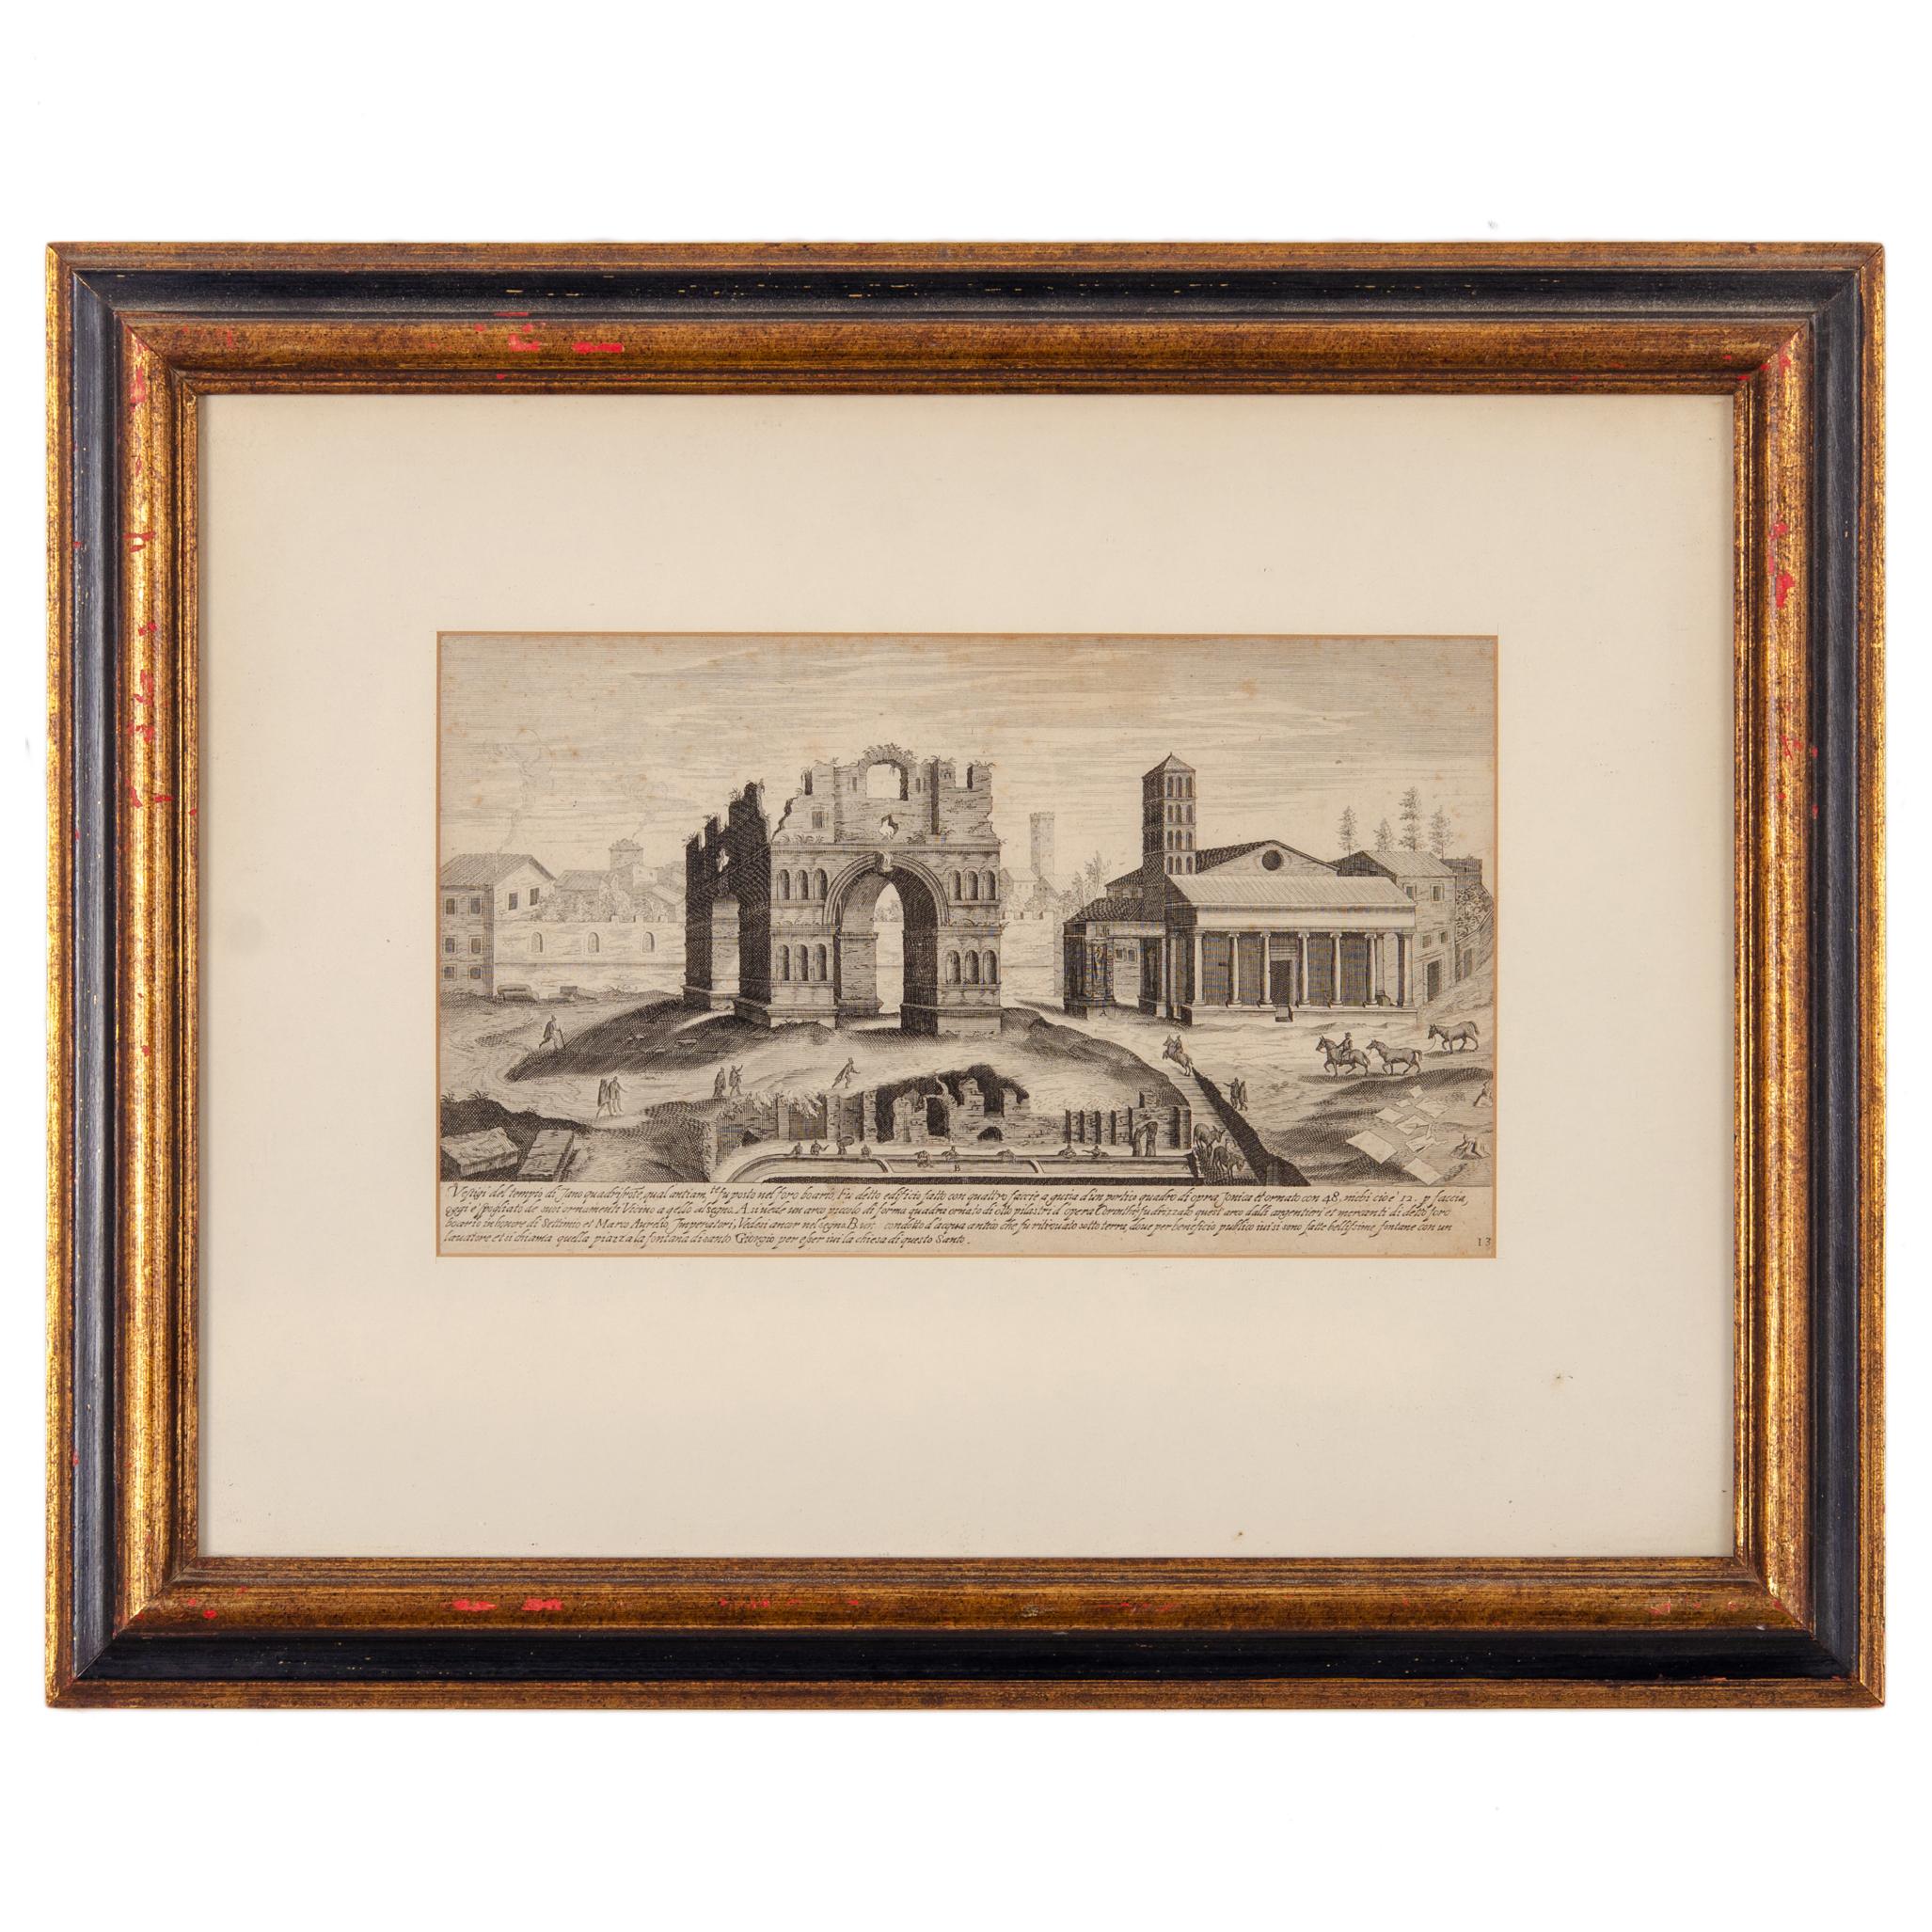 Étienne Dupérac

(French, 1535-1604)

A pair of etchings from I vestigi dell'antichita di Roma raccolti et ritratti in perspettiva depicting ruins of Ancient Rome, including the Temple of Janus and the Forum of Nerva.  It was originally published in